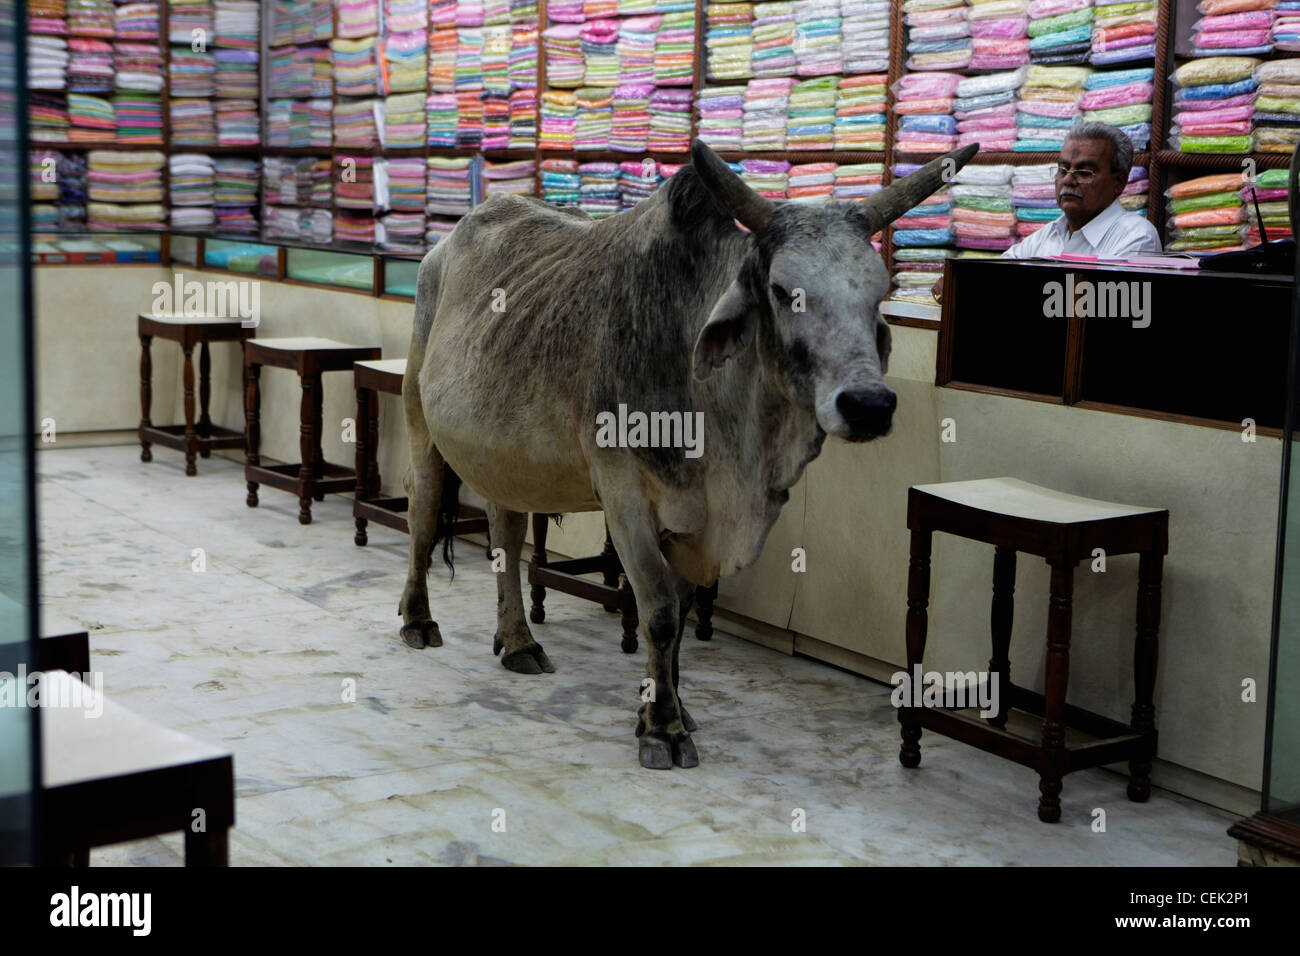 A bull in a textile shop, India Stock Photo